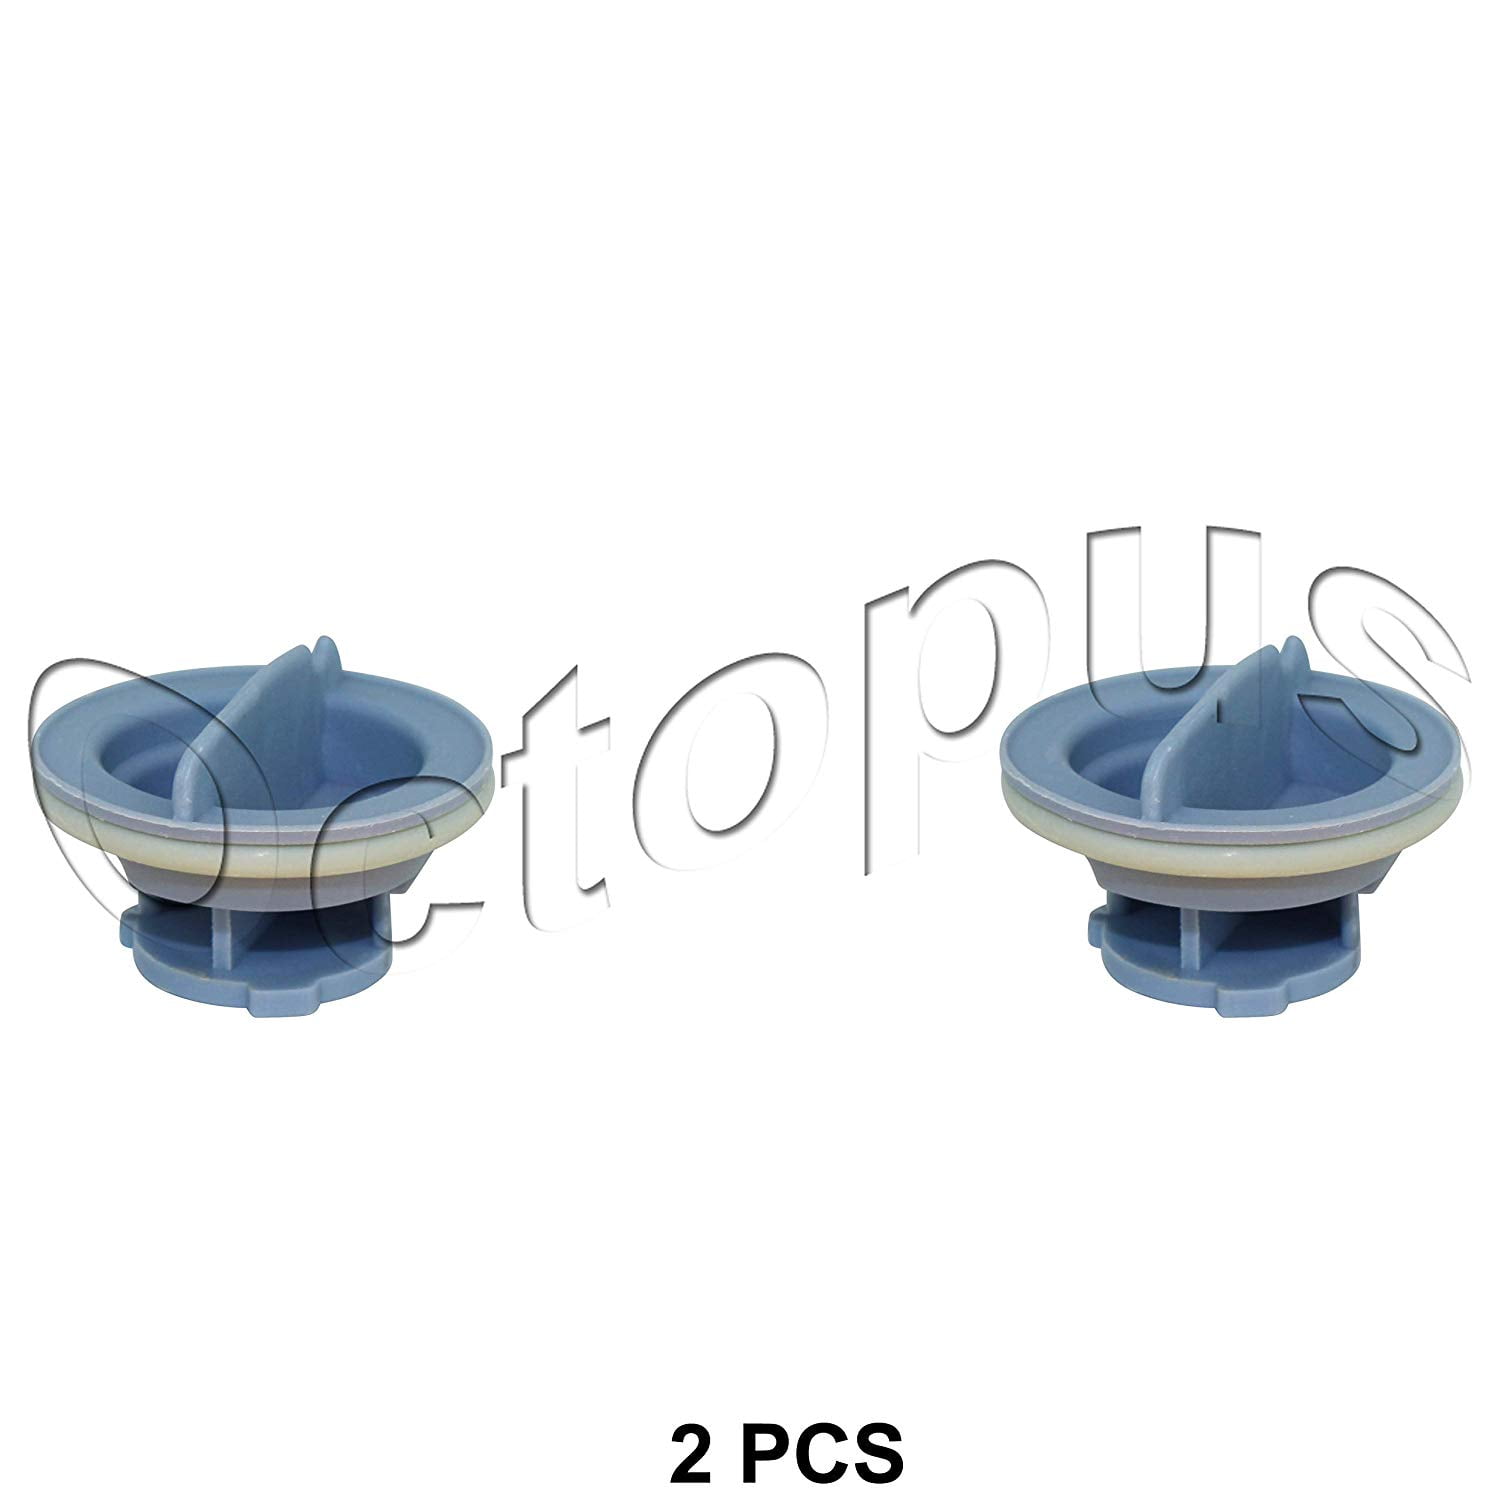 WP8558307 for Whirlpool Dishwasher Rinse Aid Cap 8558307 PS973803 